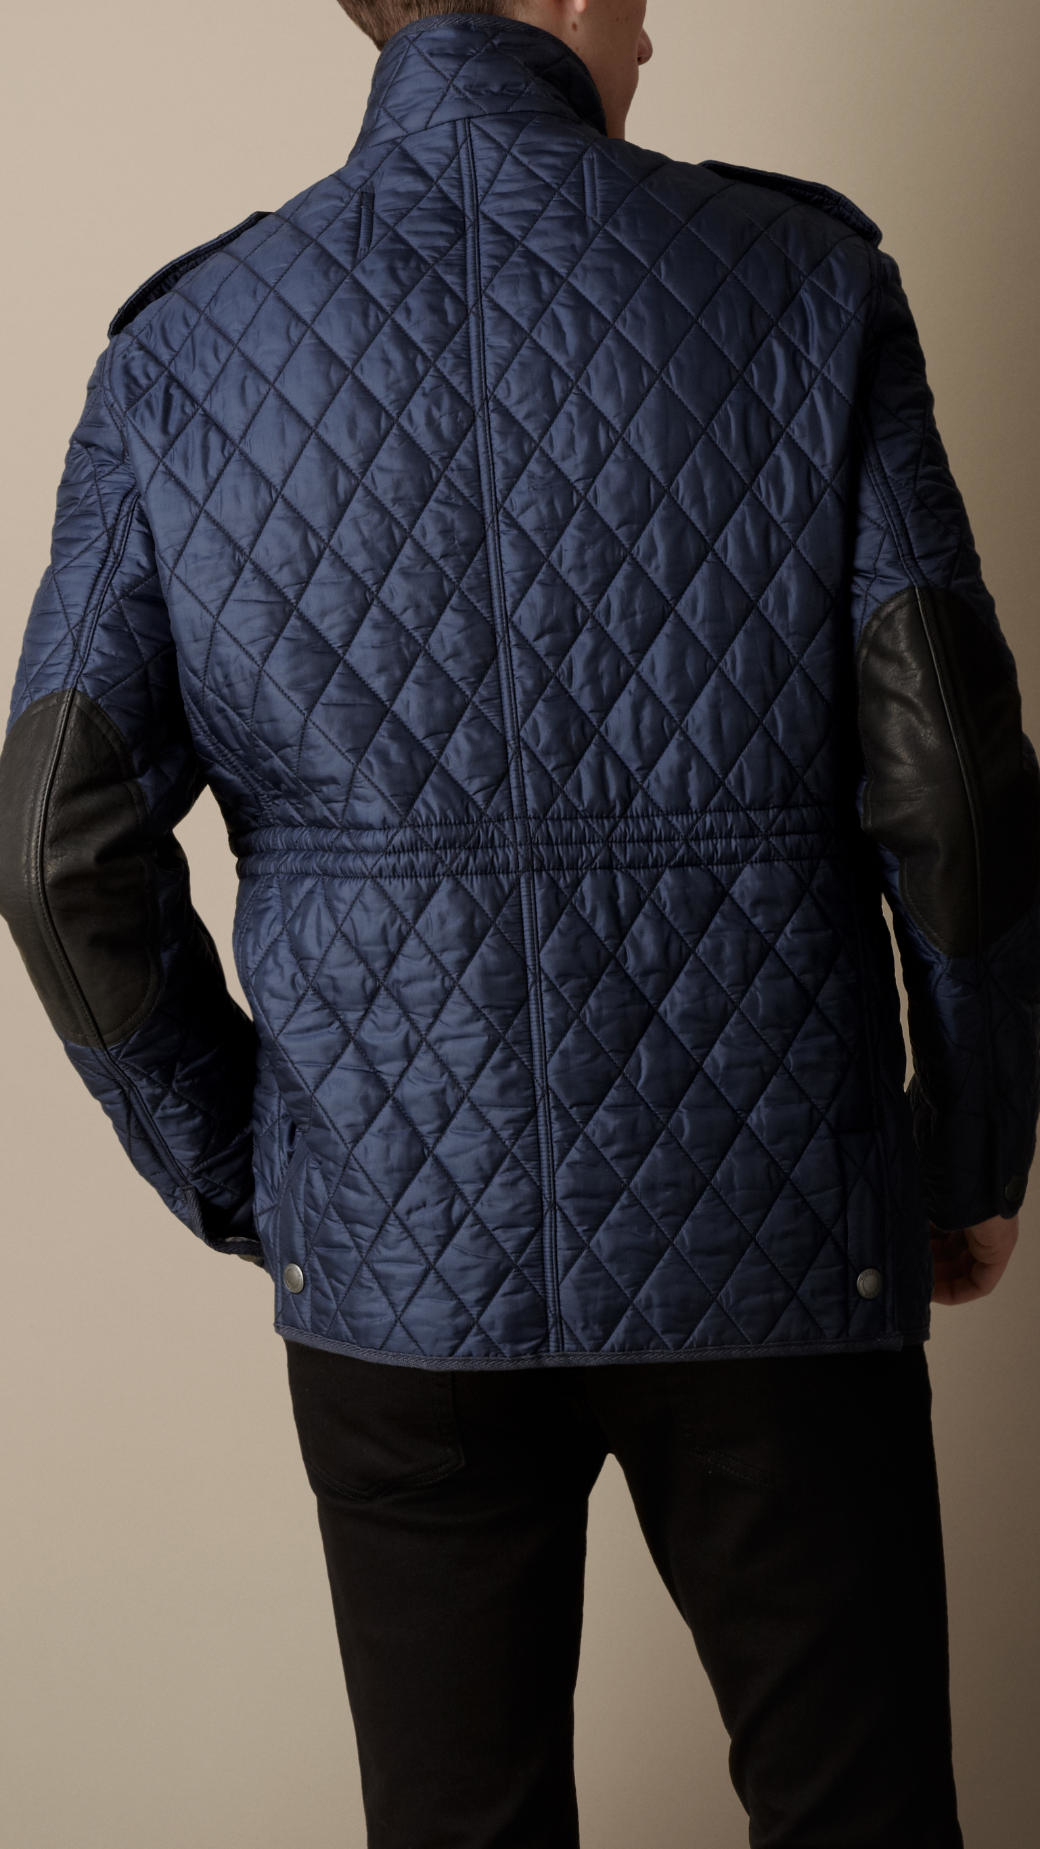 Burberry Diamond Quilted Jacket 